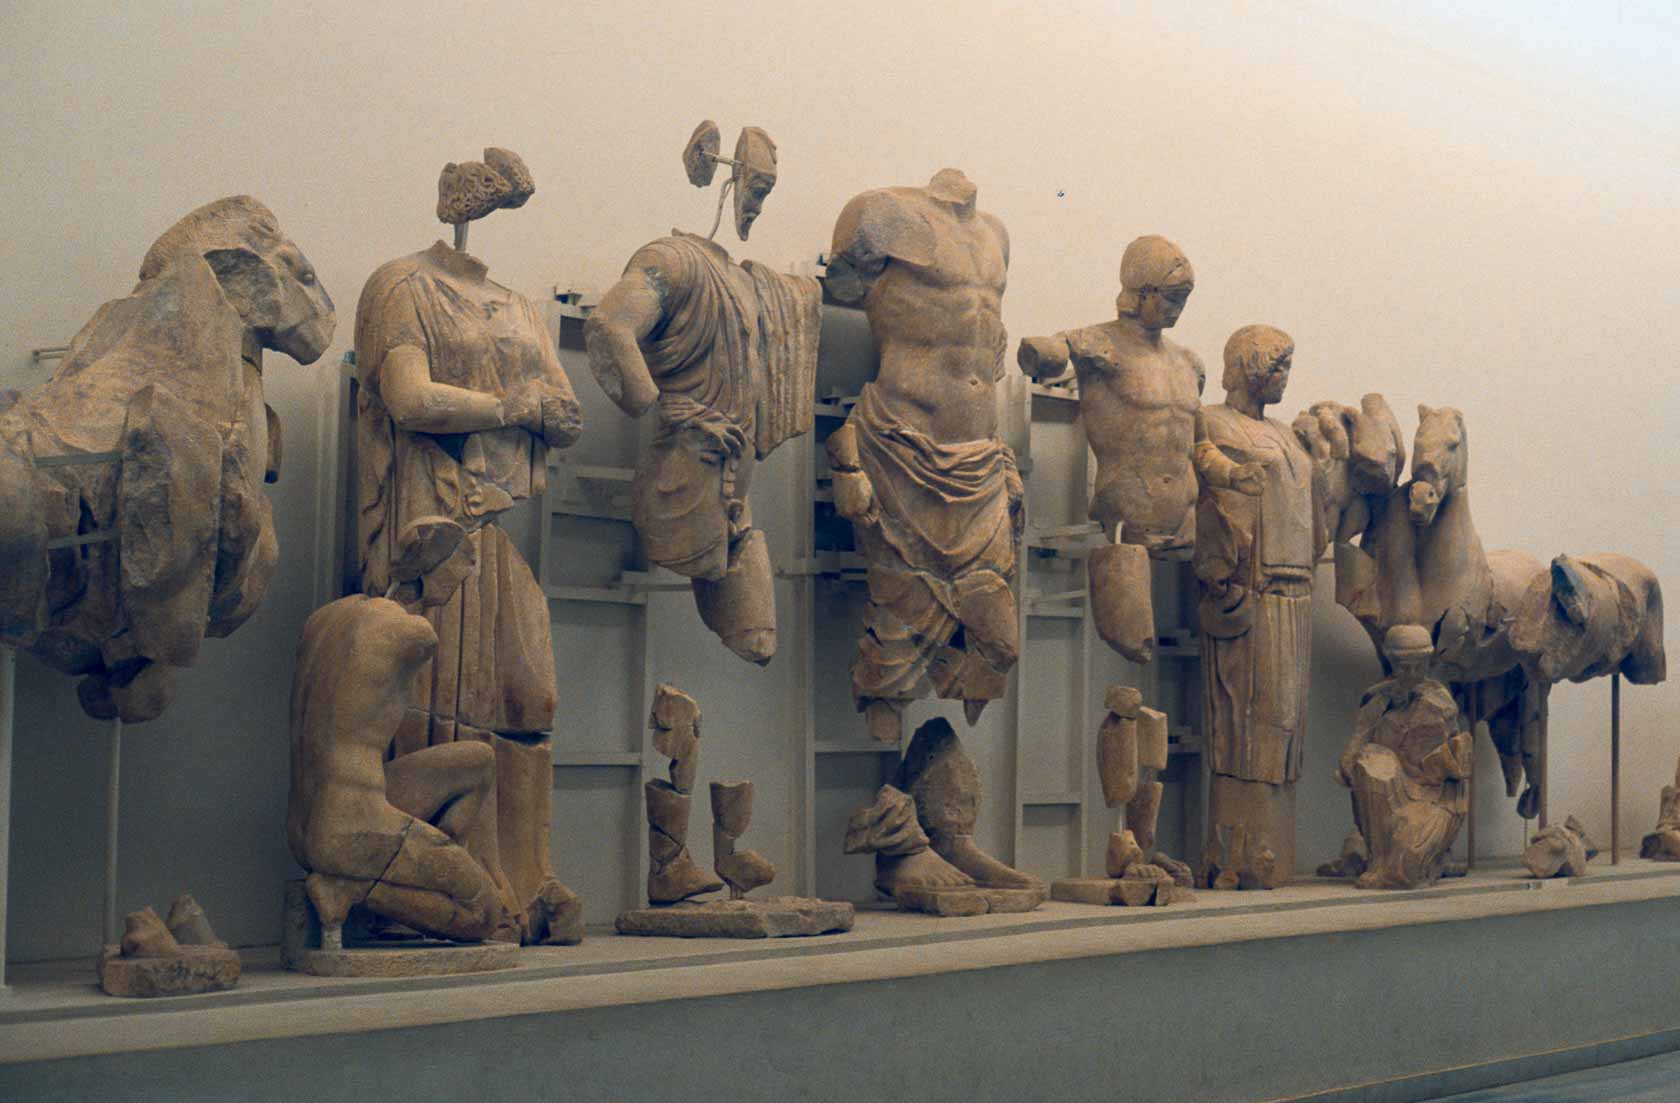 <span style="font-family: Verdana; font-size: 16px; color:">Archeologisch museum Olympia</span>